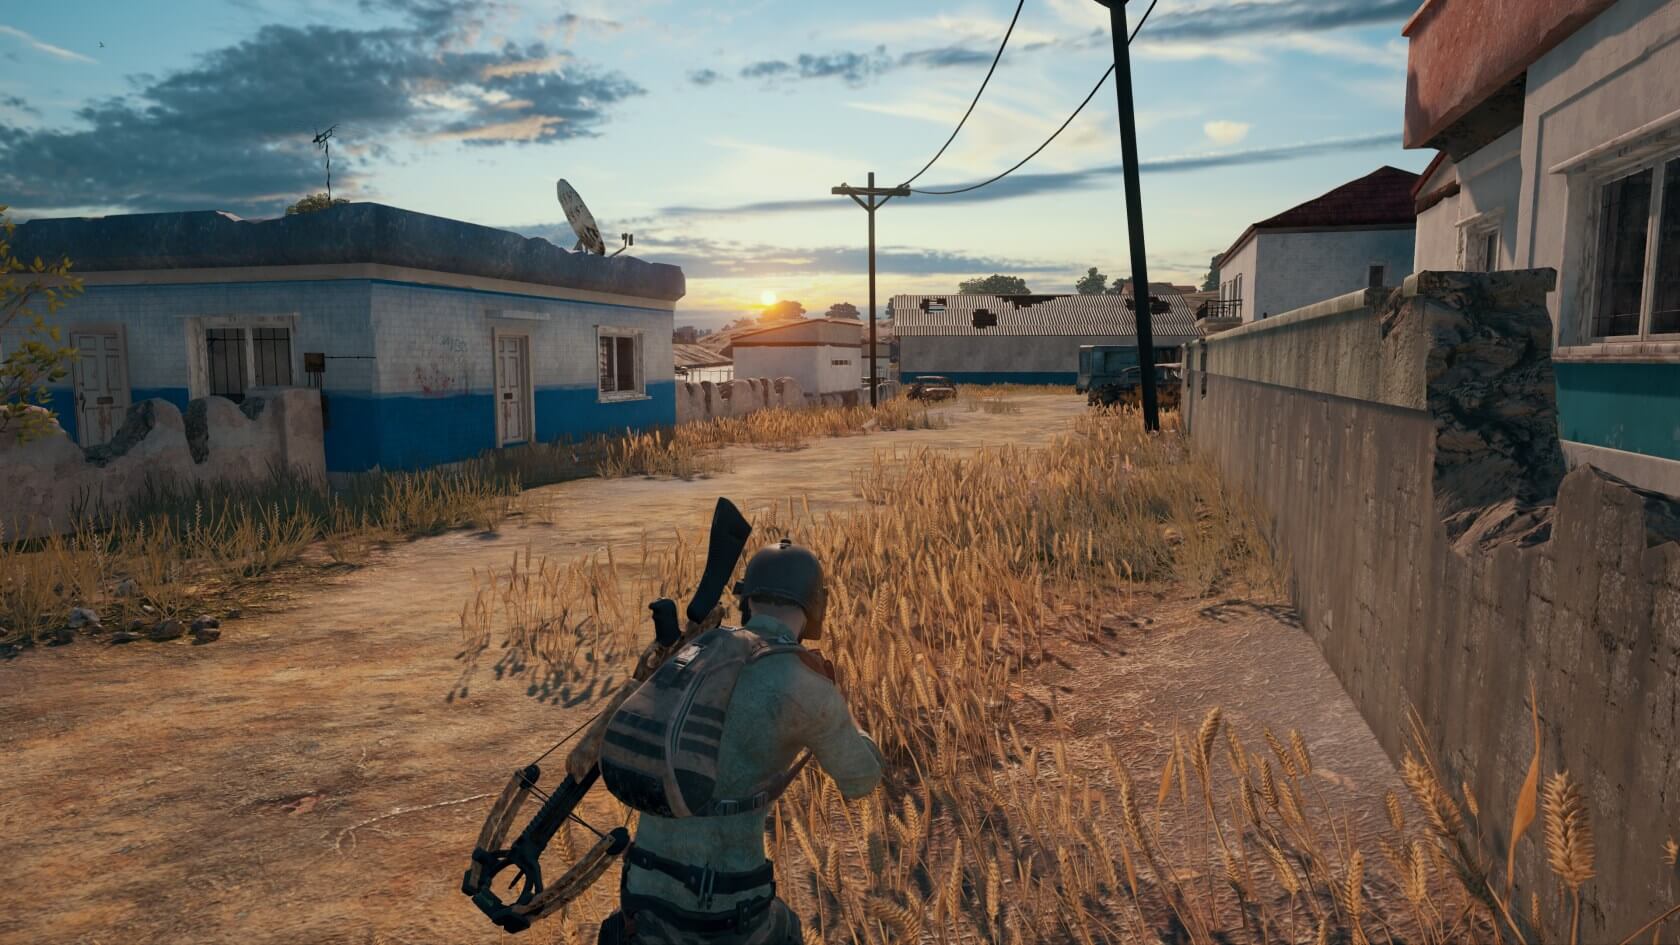 Dell rep in China claims newest laptops are good for cheating at PUBG